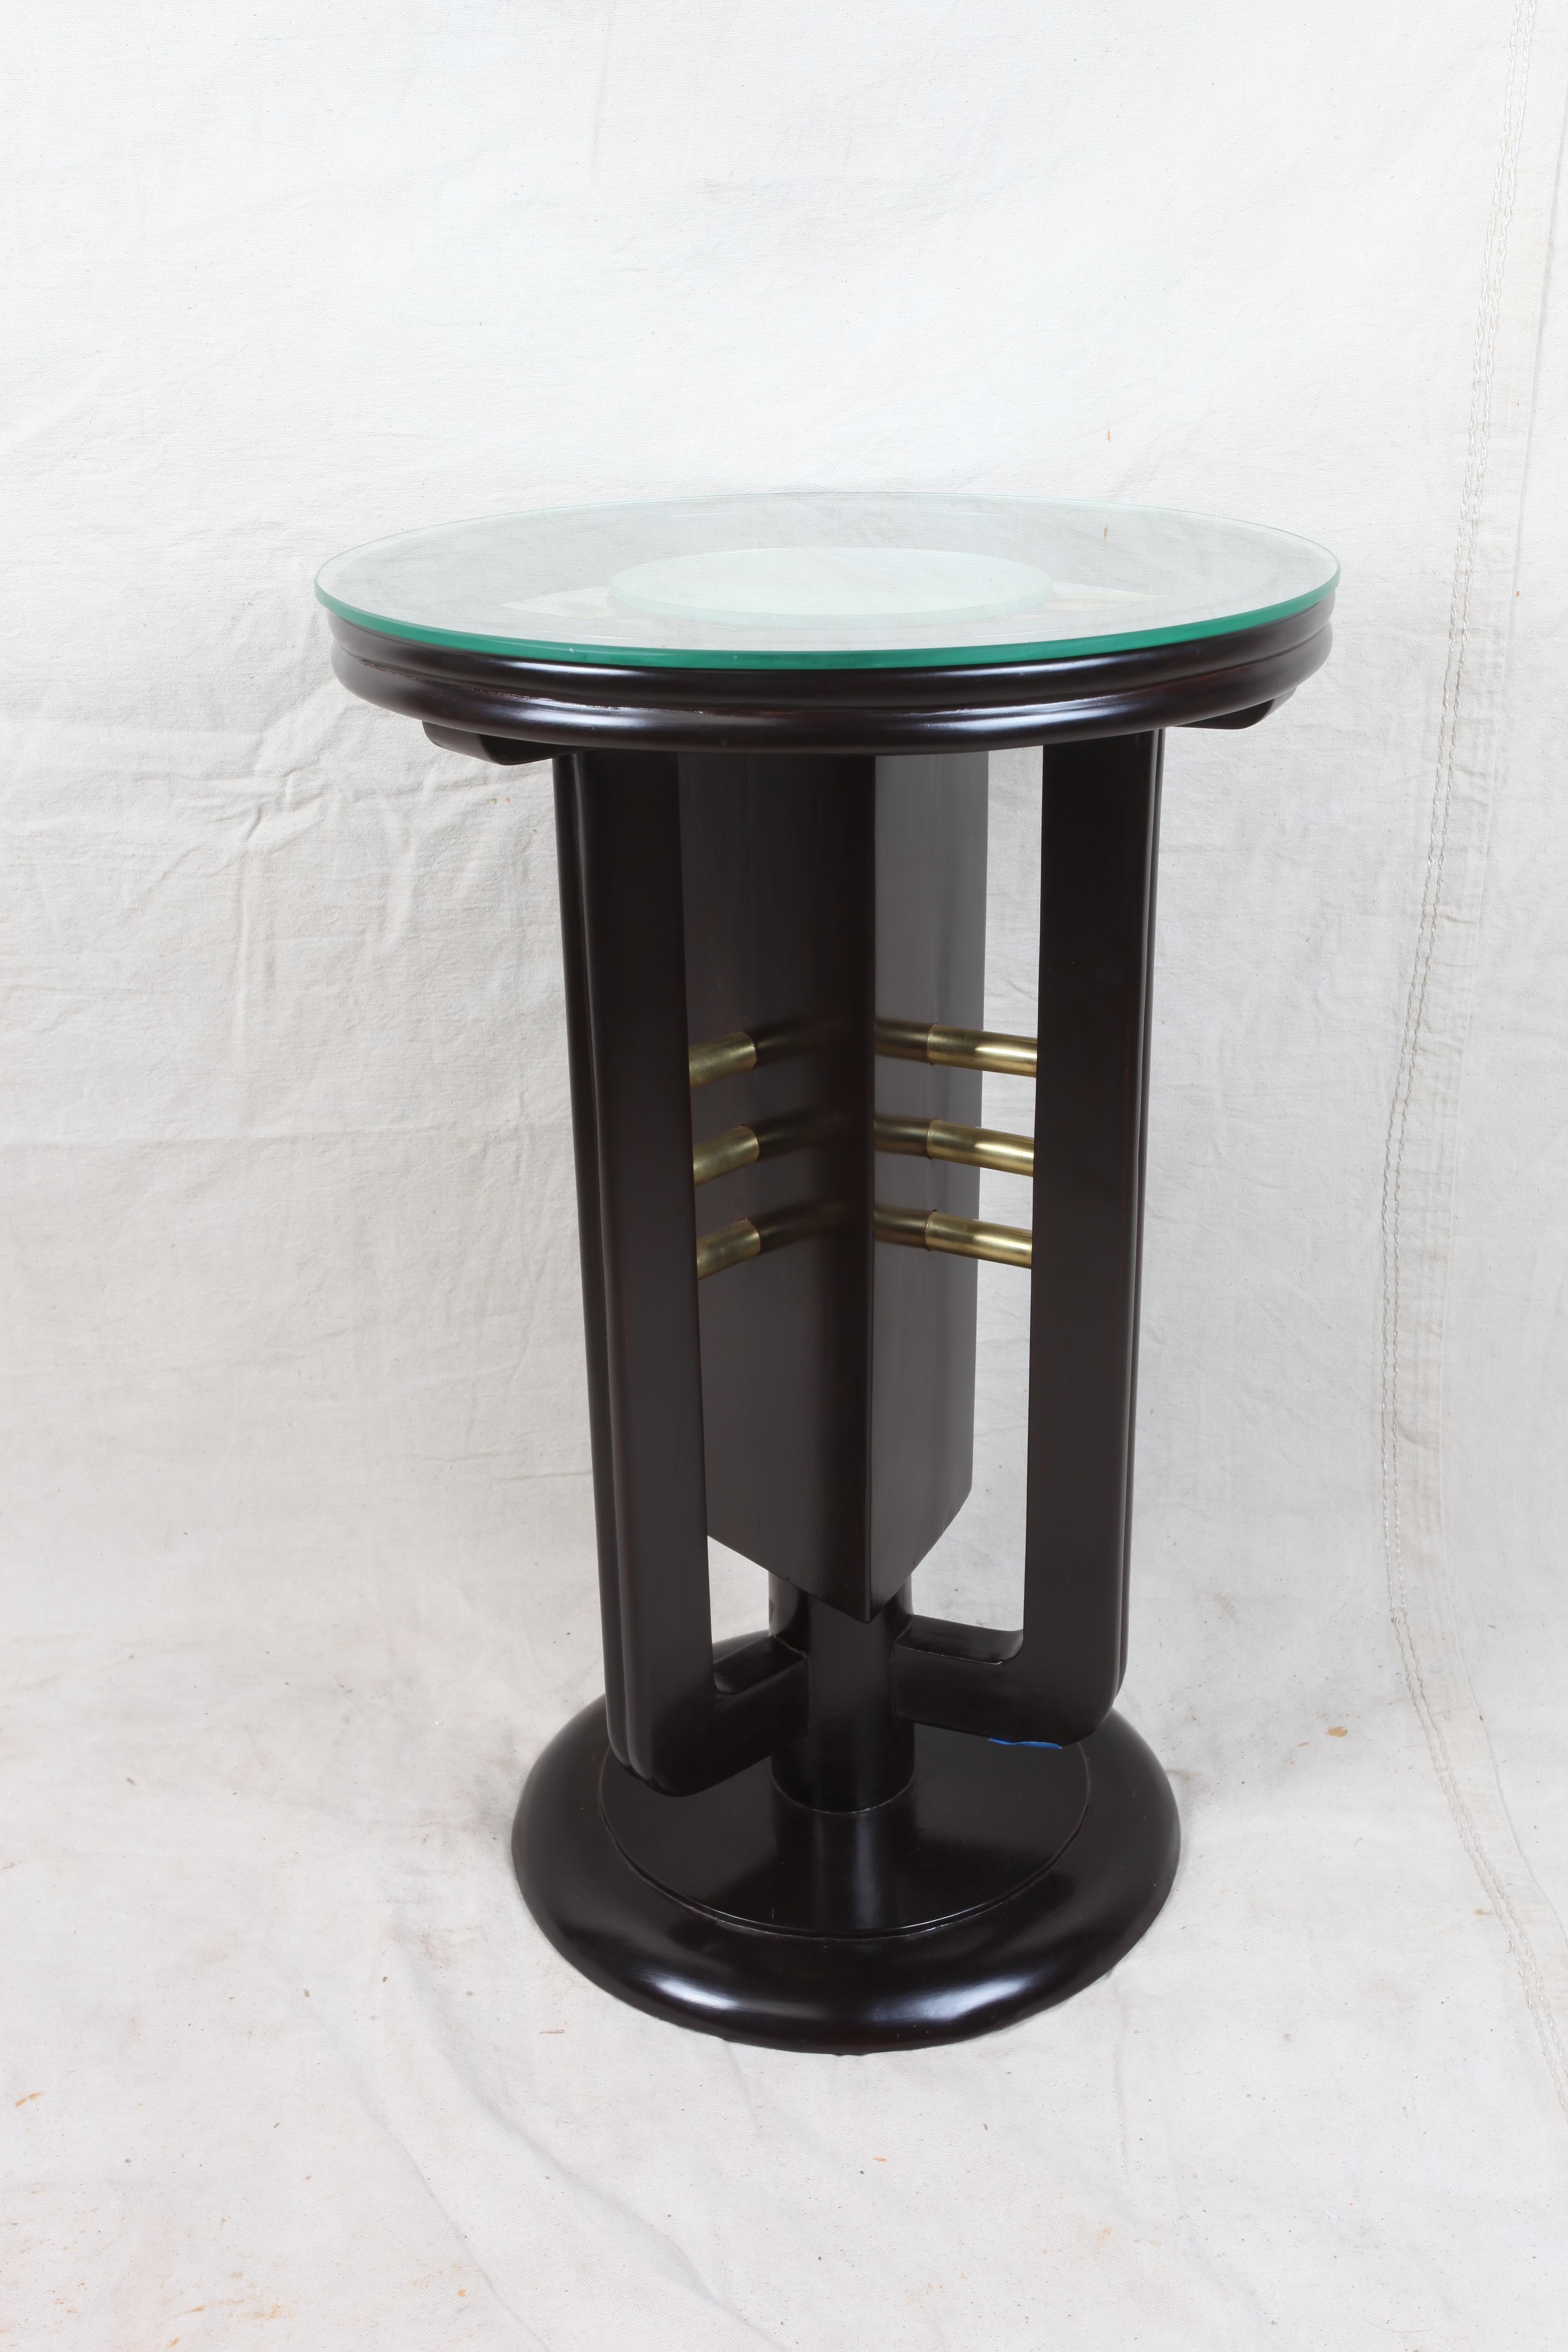 European Pair of Art Deco Teak and Brass Side Tables